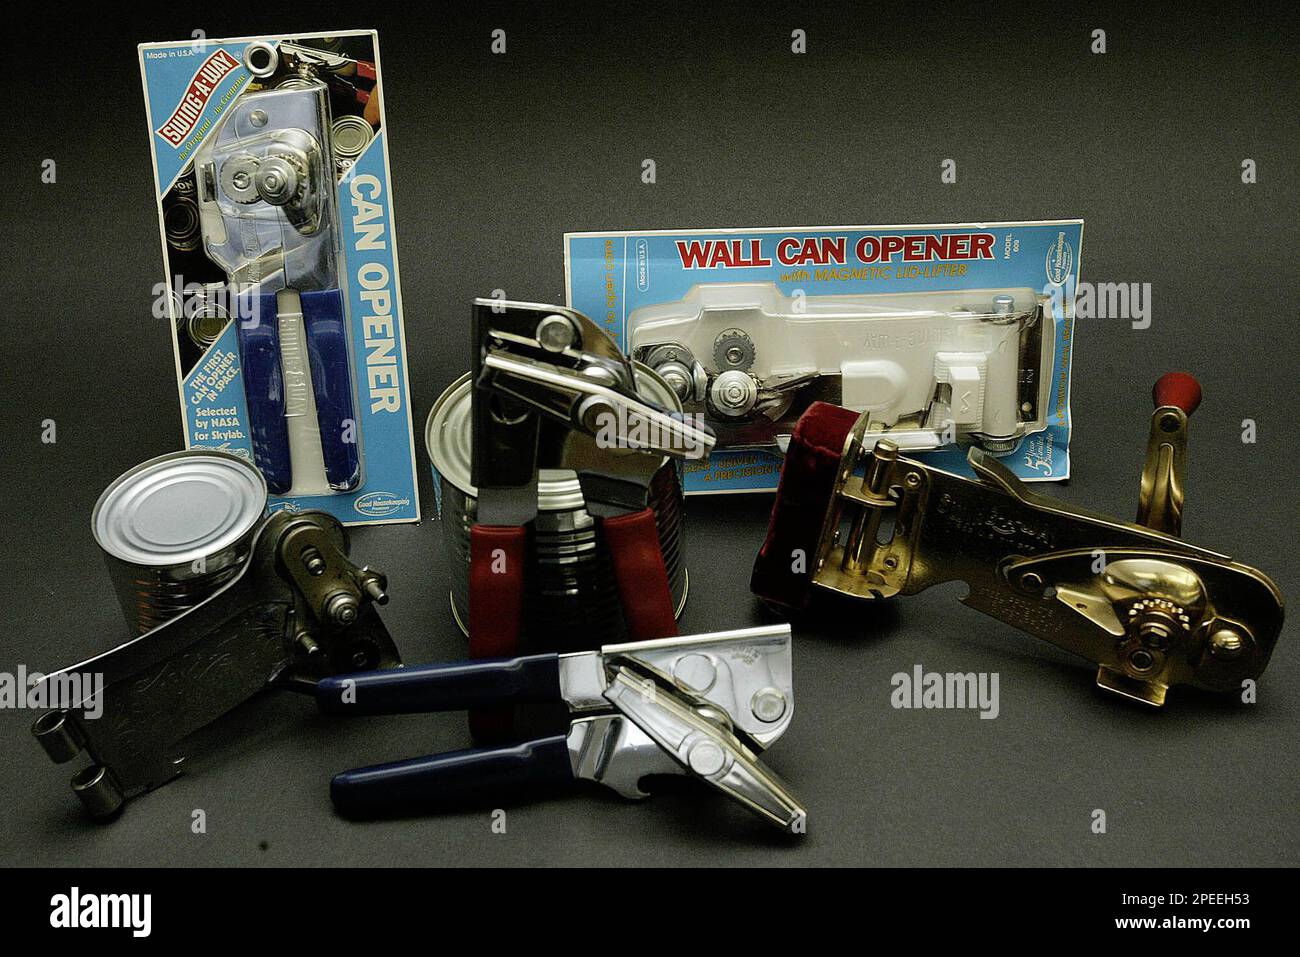 https://c8.alamy.com/comp/2PEEH53/advance-for-weekend-jan-29-30-a-collection-of-can-openers-are-shown-thursday-jan-27-2005-made-by-swing-a-way-manufacturing-company-in-st-louis-fifty-one-years-after-idus-rhodes-launched-a-handy-kitchen-gadget-from-his-st-louis-factory-the-swing-a-way-can-opener-is-still-cranking-out-the-customer-compliments-and-remains-the-industry-leader-the-200-million-sold-since-then-and-roughly-3-million-each-year-occupy-a-spot-in-many-us-kitchens-silverware-drawers-the-openerhas-carried-the-good-housekeeping-seal-for-decades-and-was-the-first-in-space-selected-by-nasa-for-skyla-2PEEH53.jpg